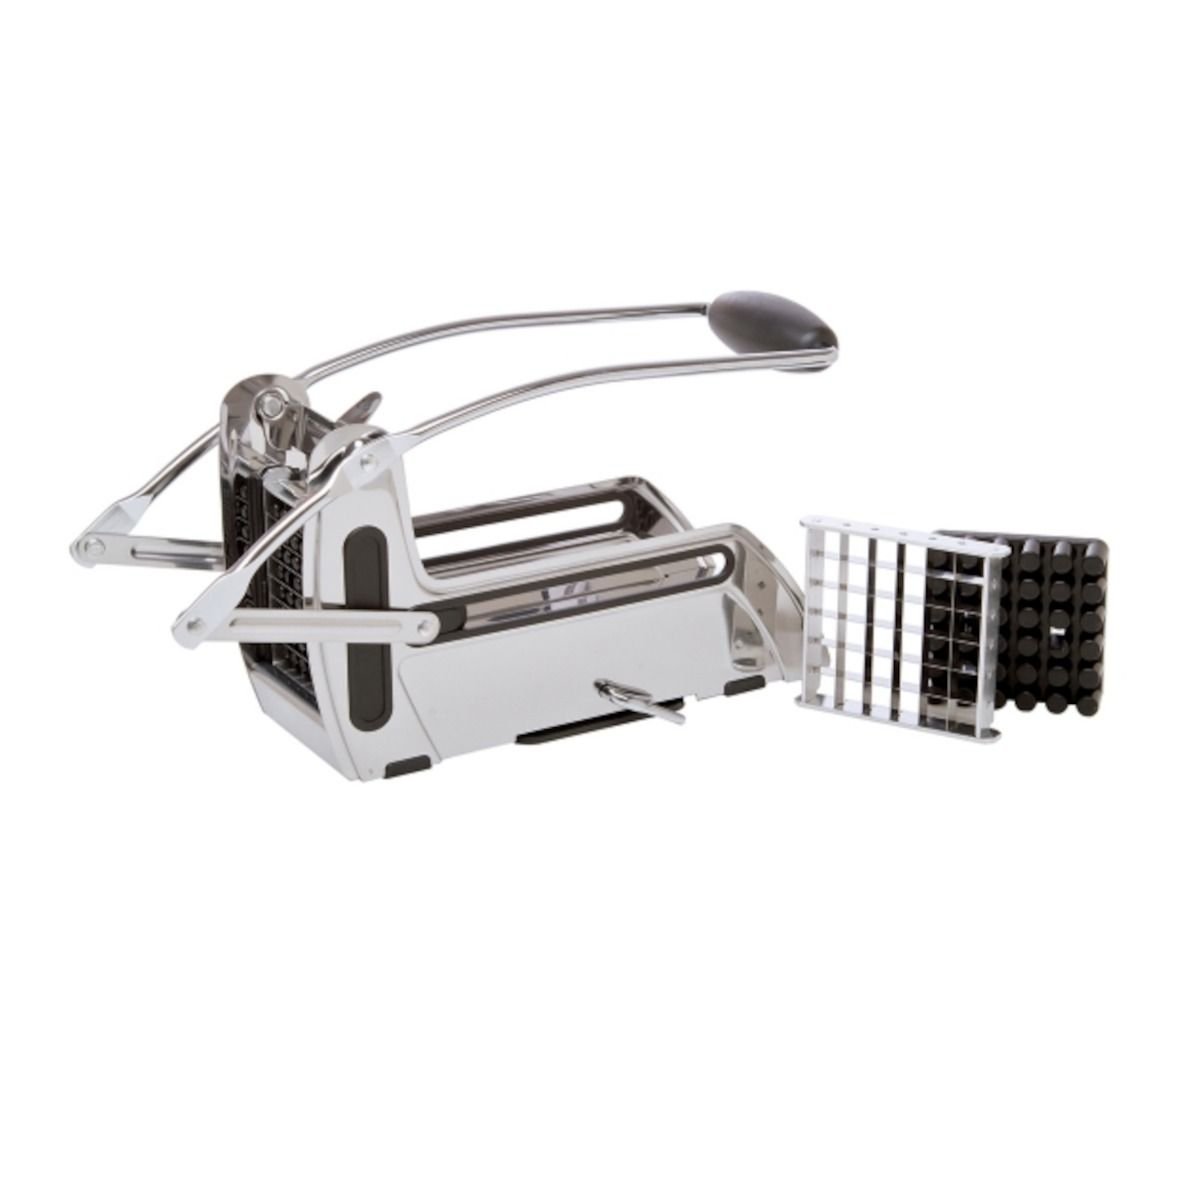 Lem French Fry Cutter